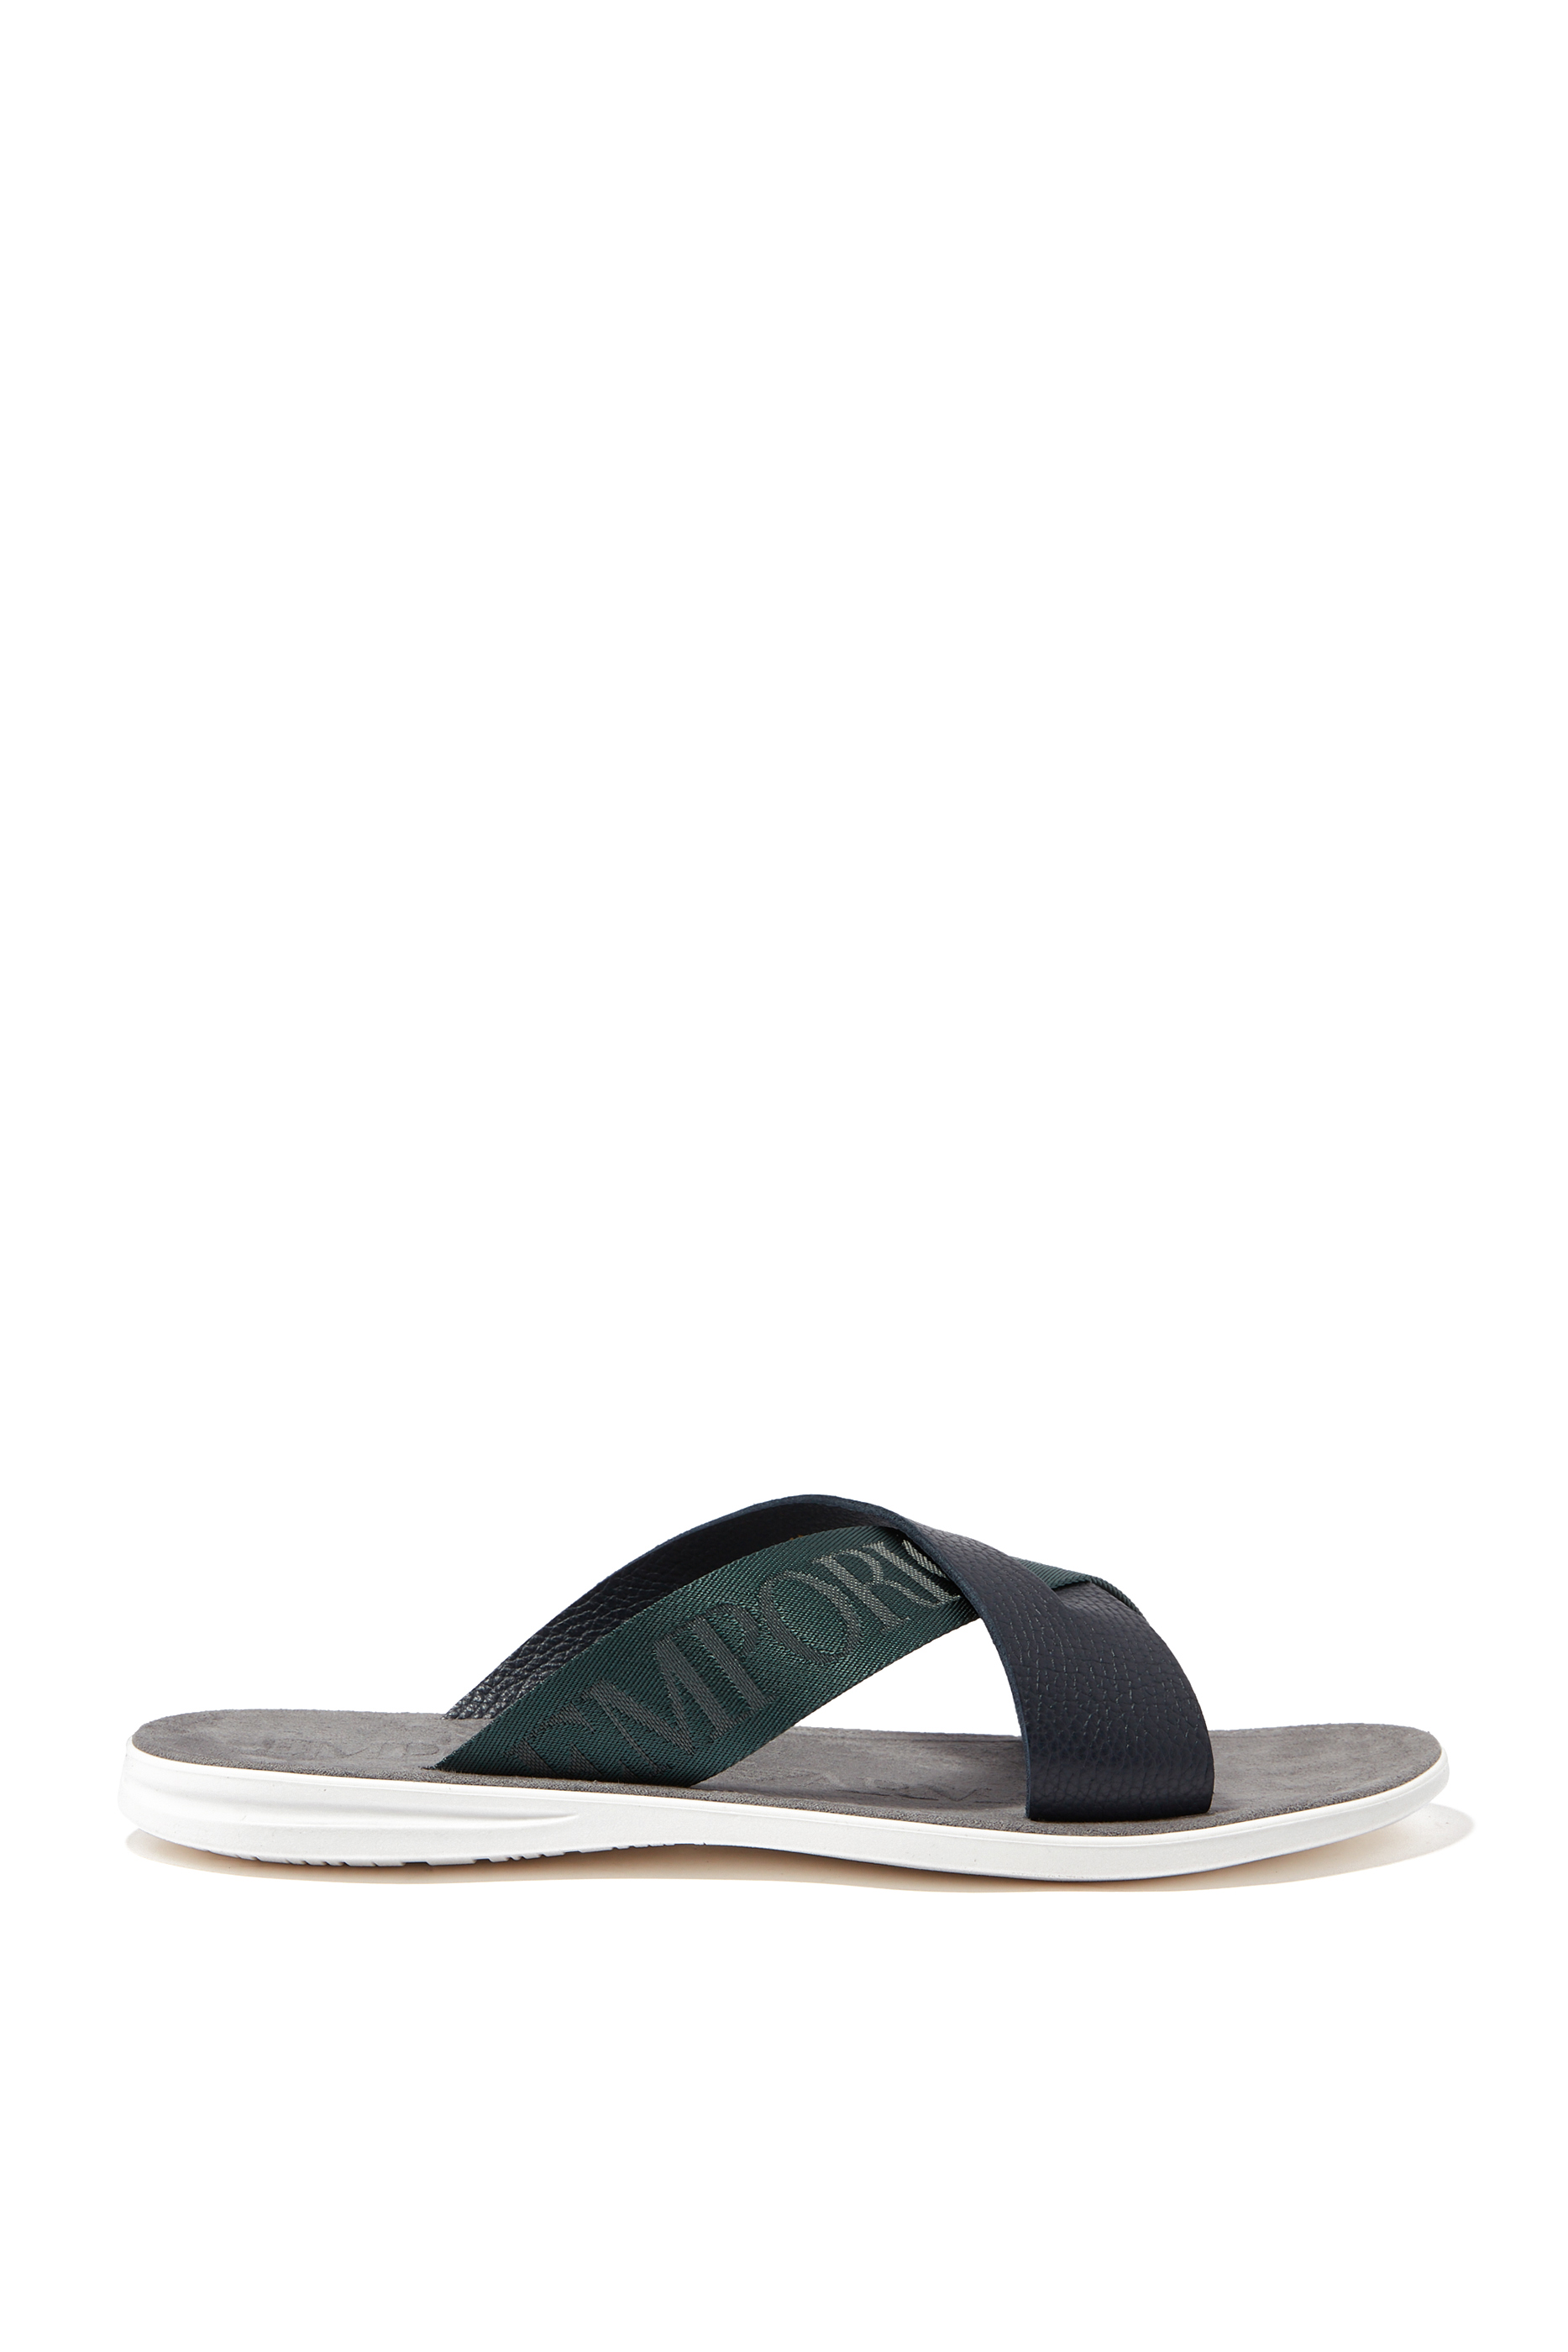 Buy Emporio Armani Logo Kriss Kross Leather Sandals for | Bloomingdale ...